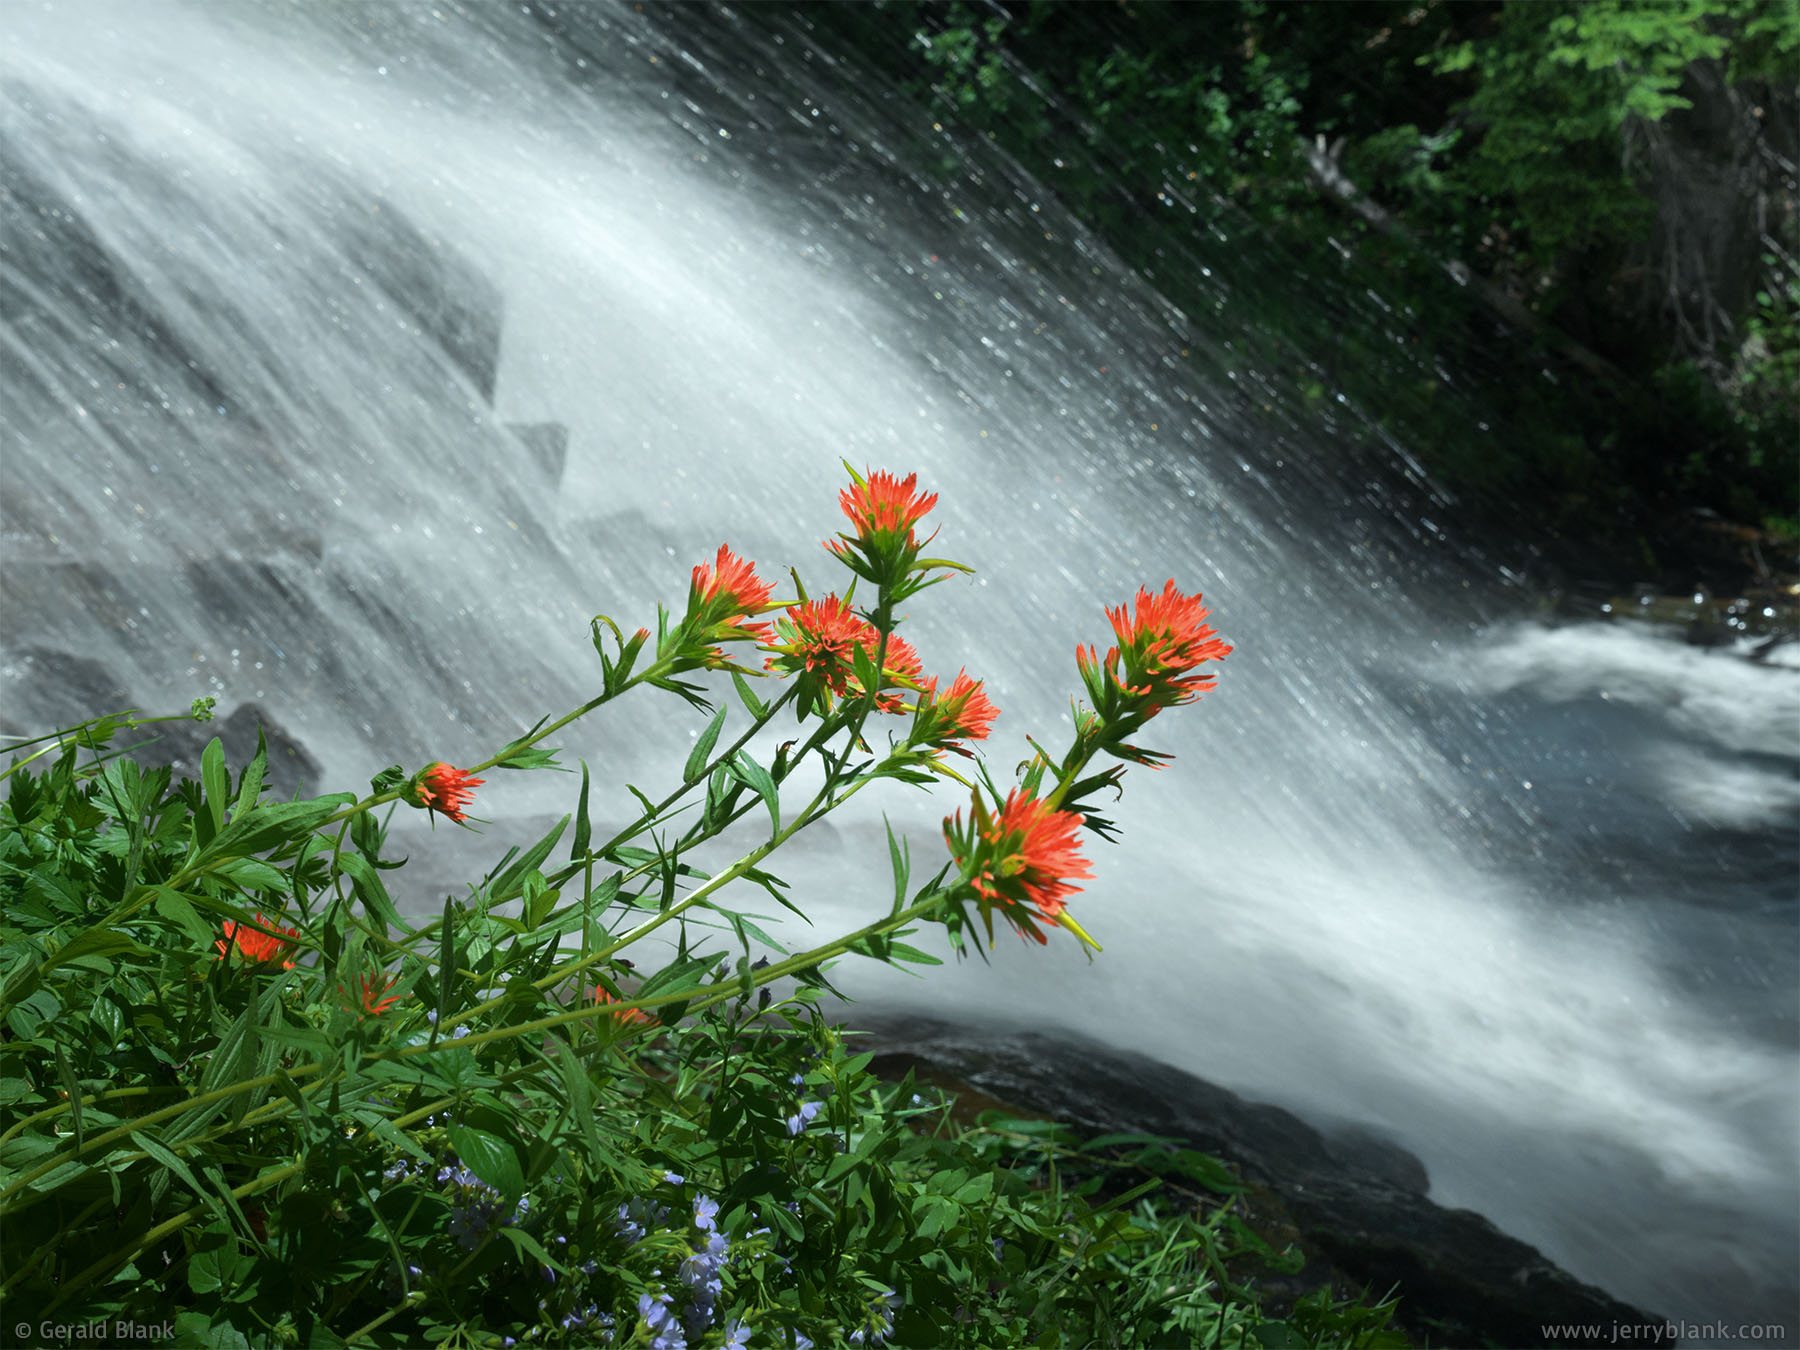 #37148 - Red-orange Indian paintbrush growing near Umbrella Falls on the East Fork of the Hood River, Mount Hood Meadows, Oregon - photo by Jerry Blank